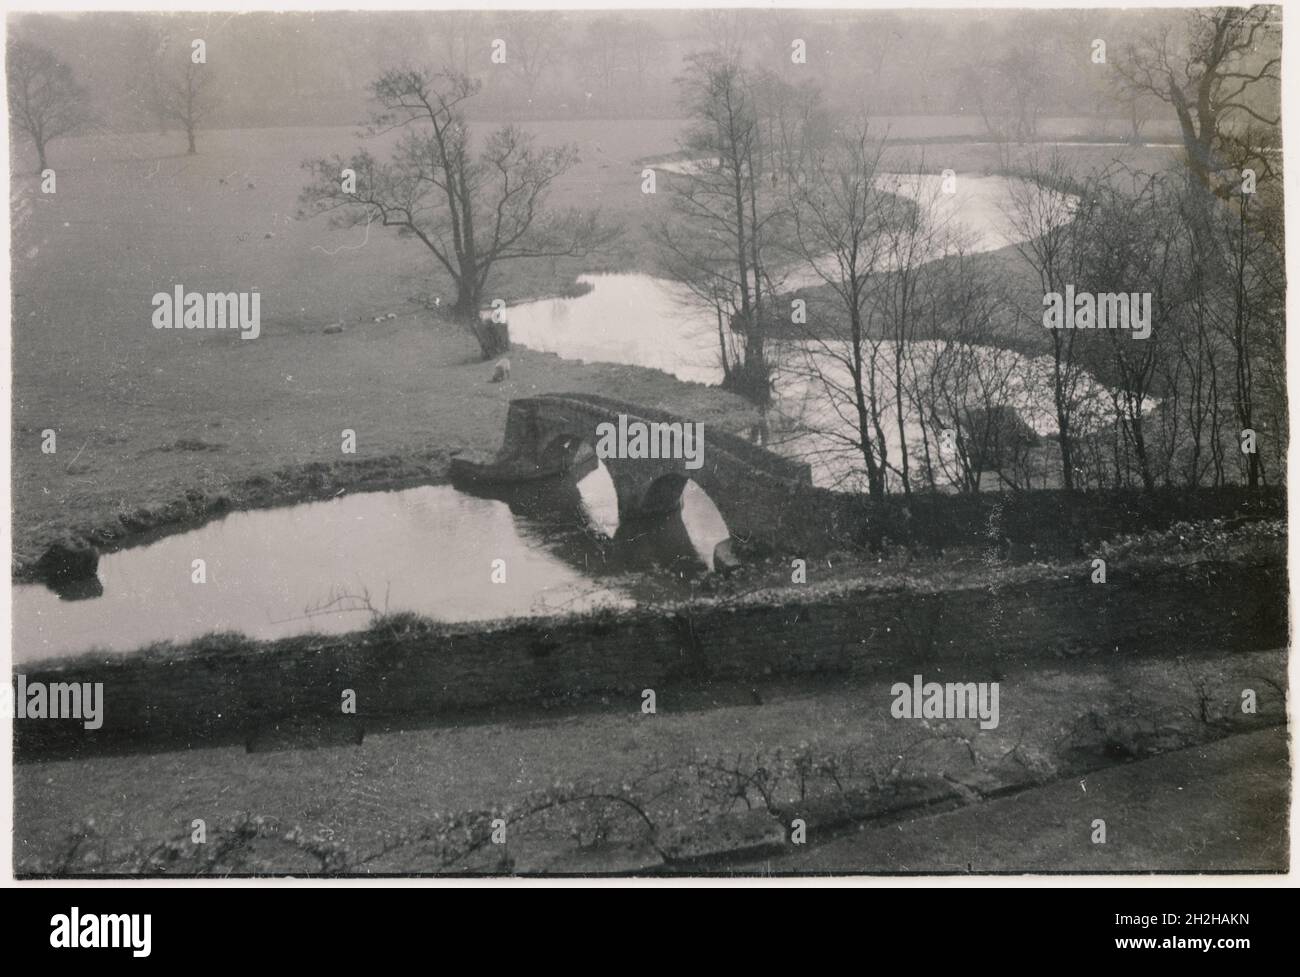 Dorothy Vernon's Bridge, Haddon Hall, Nether Haddon, Derbyshire Dales, Derbyshire, 1950-1964. A view from Haddon Hall, looking down towards Dorothy Vernon's bridge over the River Wye. The bridge derives its name from the legend that Dorothy Vernon (1544-1584), the heiress of Haddon Hall, escaped over this bridge to elope with her lover during the festivities of her sister's wedding. Stock Photo